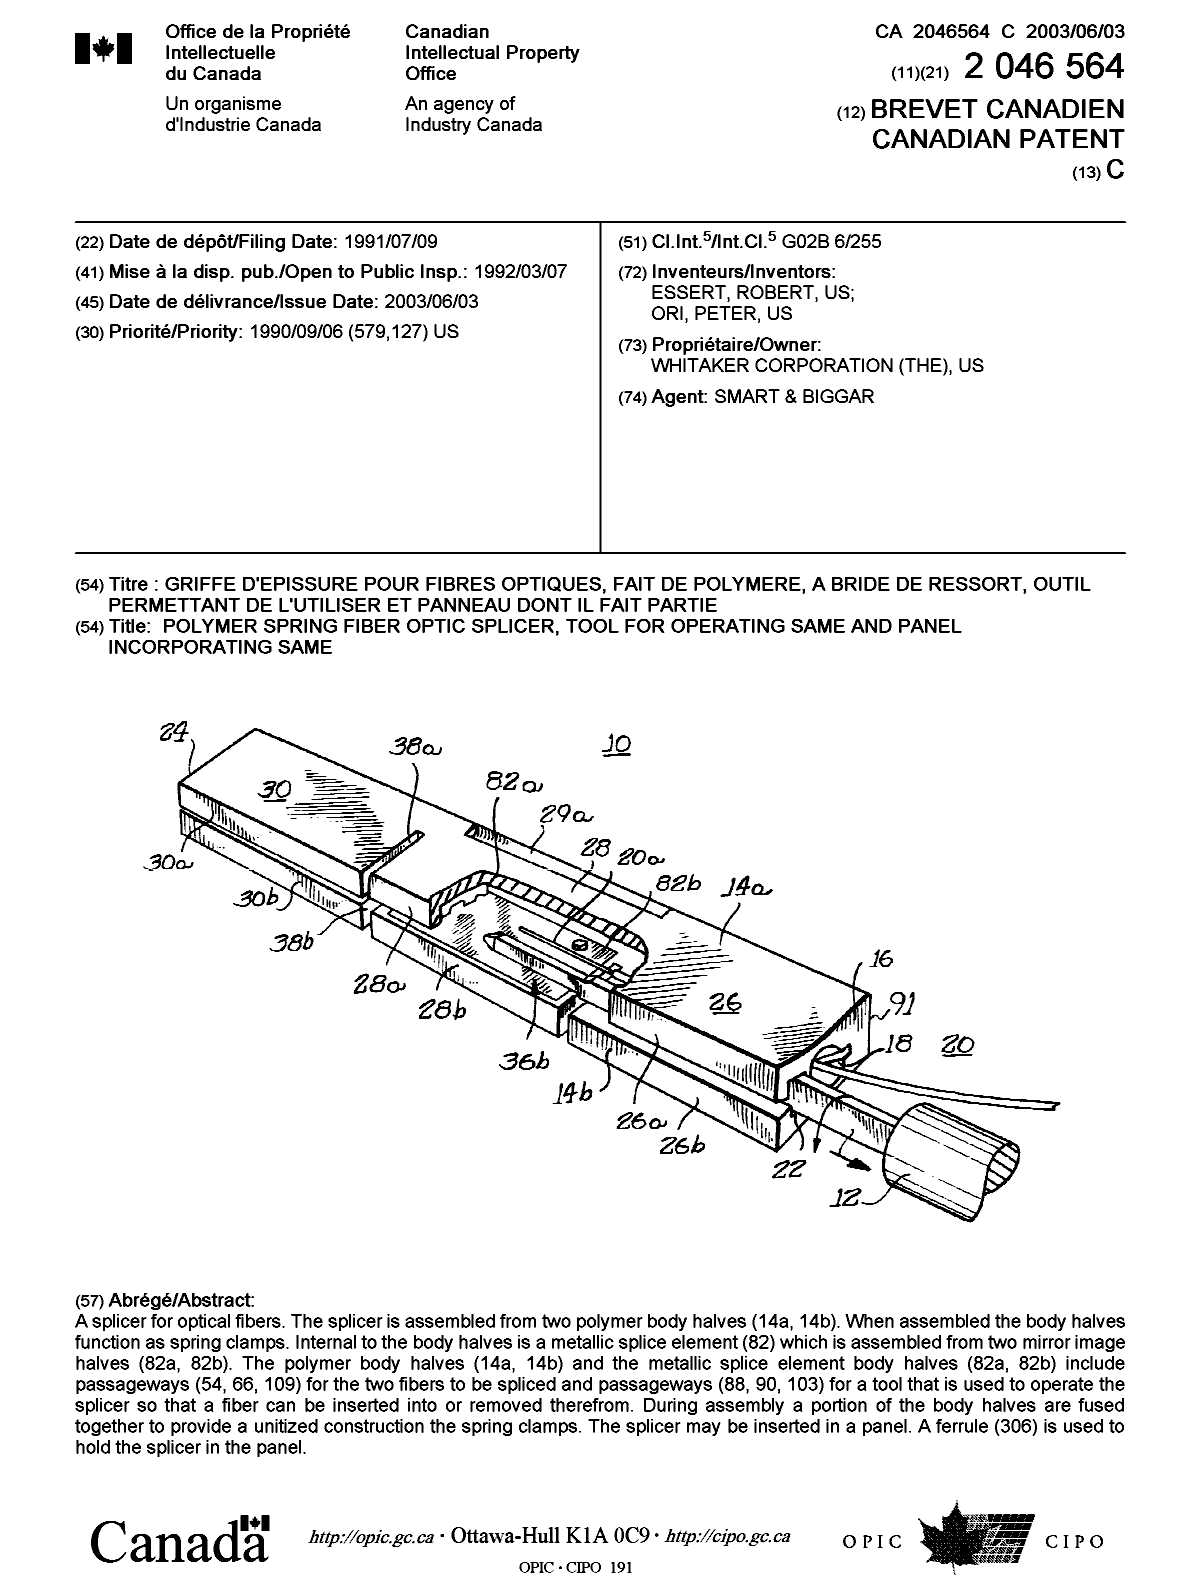 Canadian Patent Document 2046564. Cover Page 20030429. Image 1 of 1